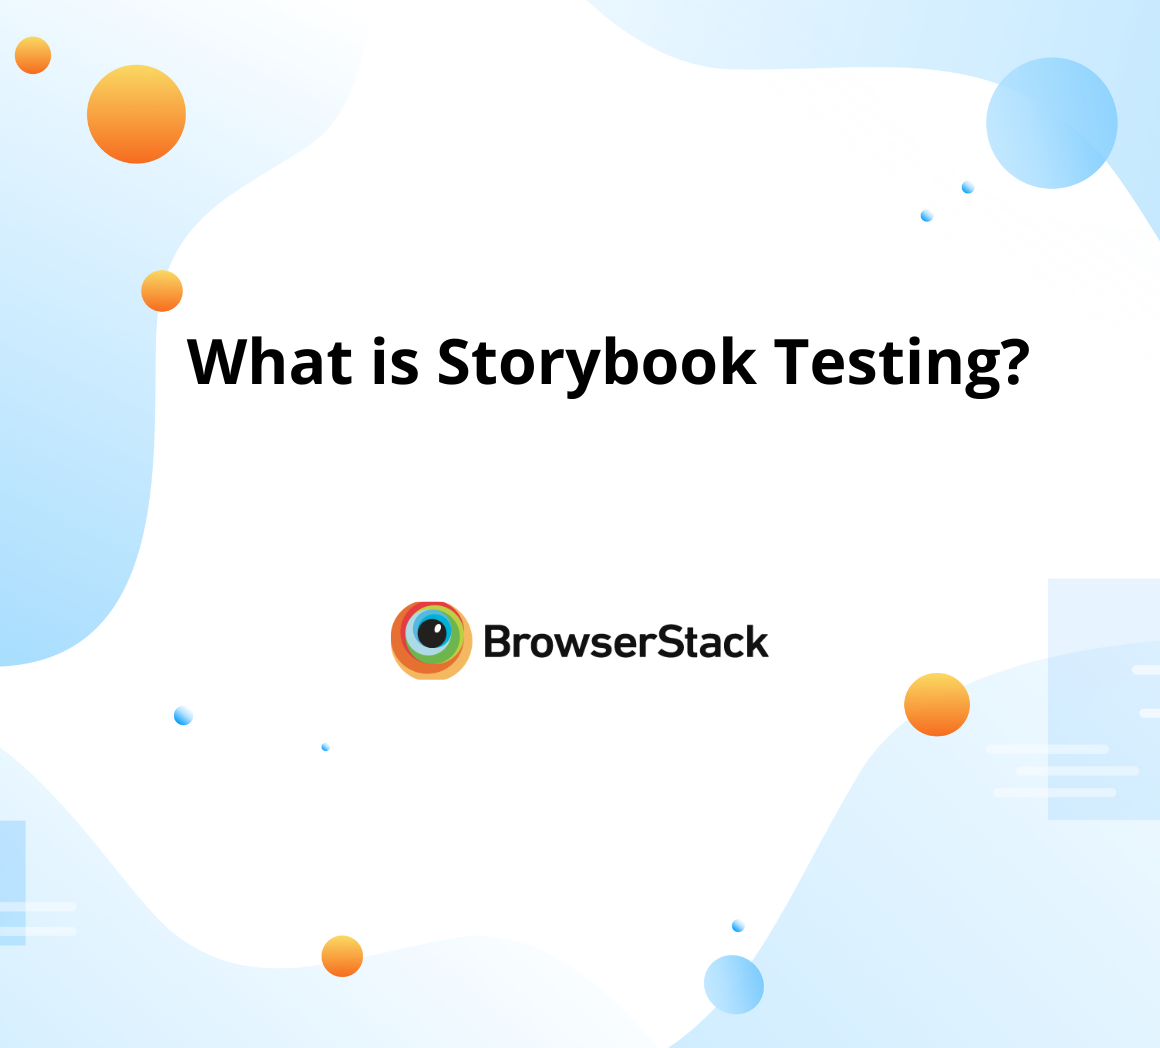 What is Storybook Testing